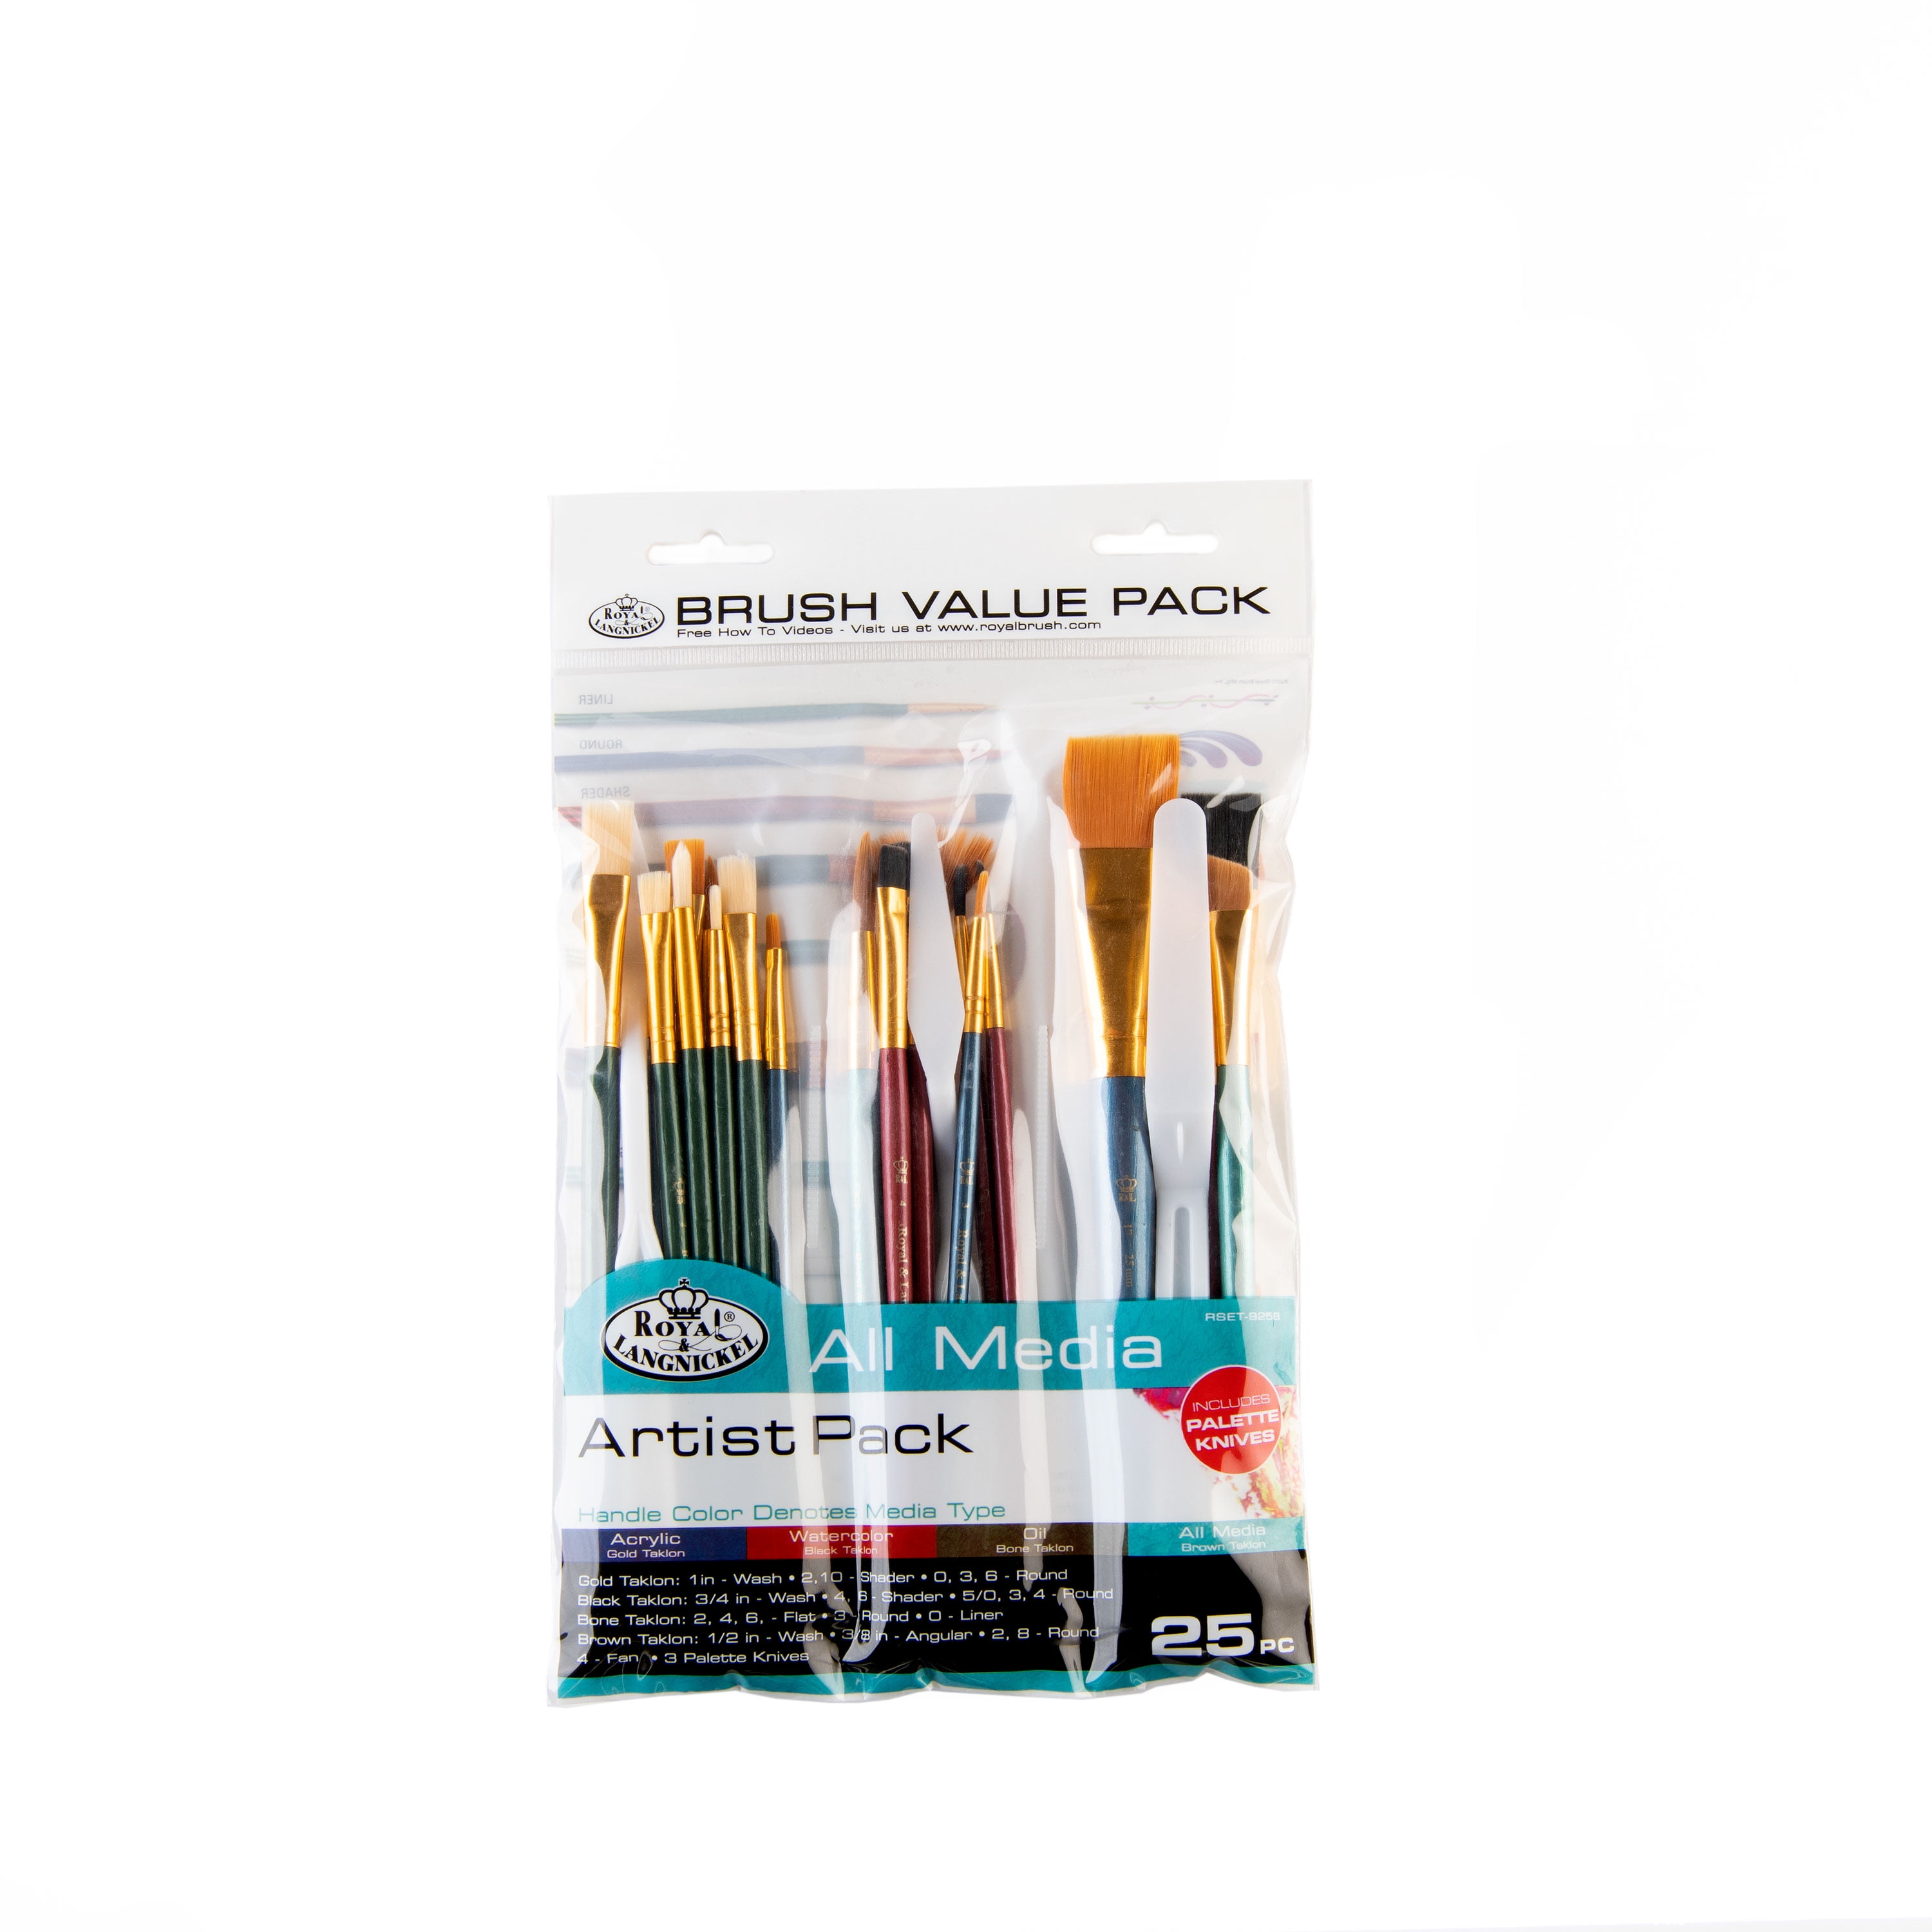 NEW PAINTER'S COLLECTION ALL PURPOSE 3"  BRUSHES WOOD HANDLES 6 RM3-PO-20 